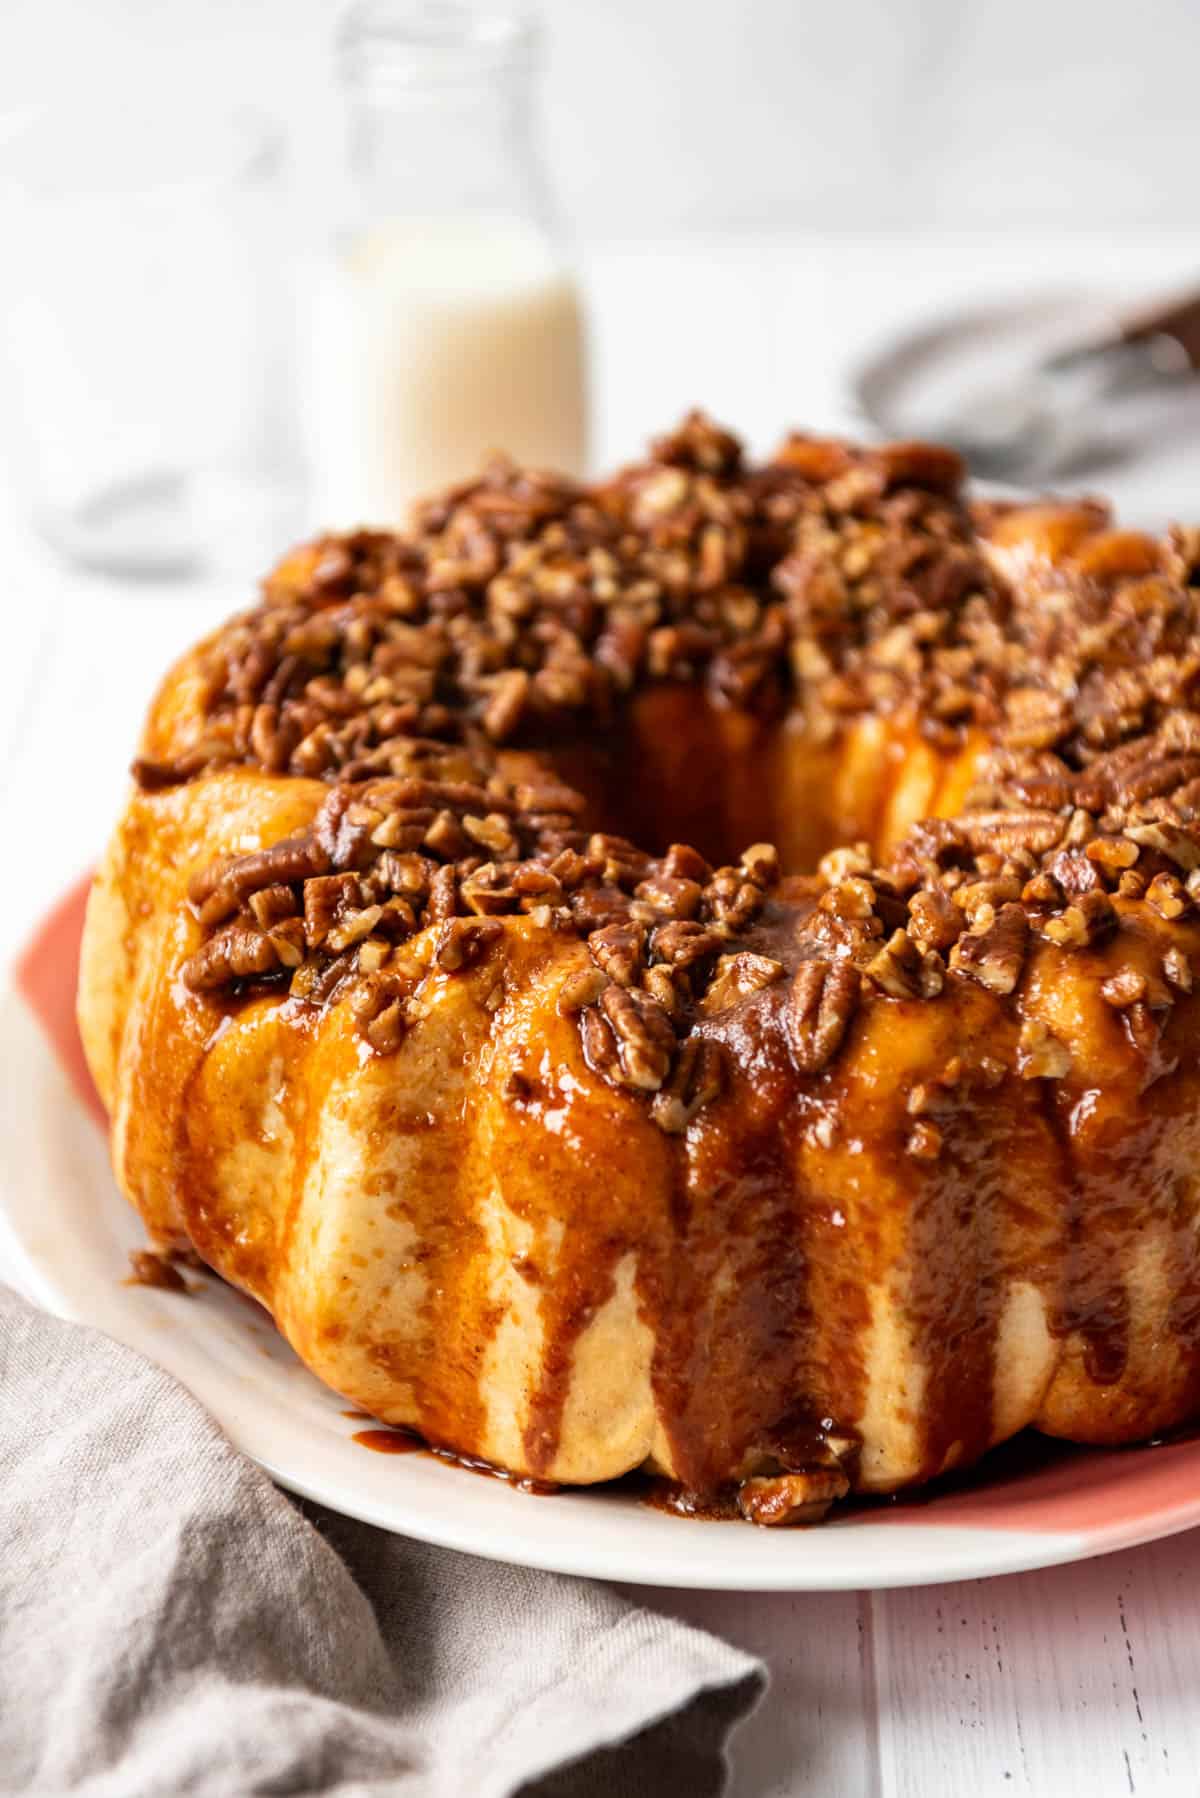 A side angle of caramel dripping down the sides of monkey bread on a plate.